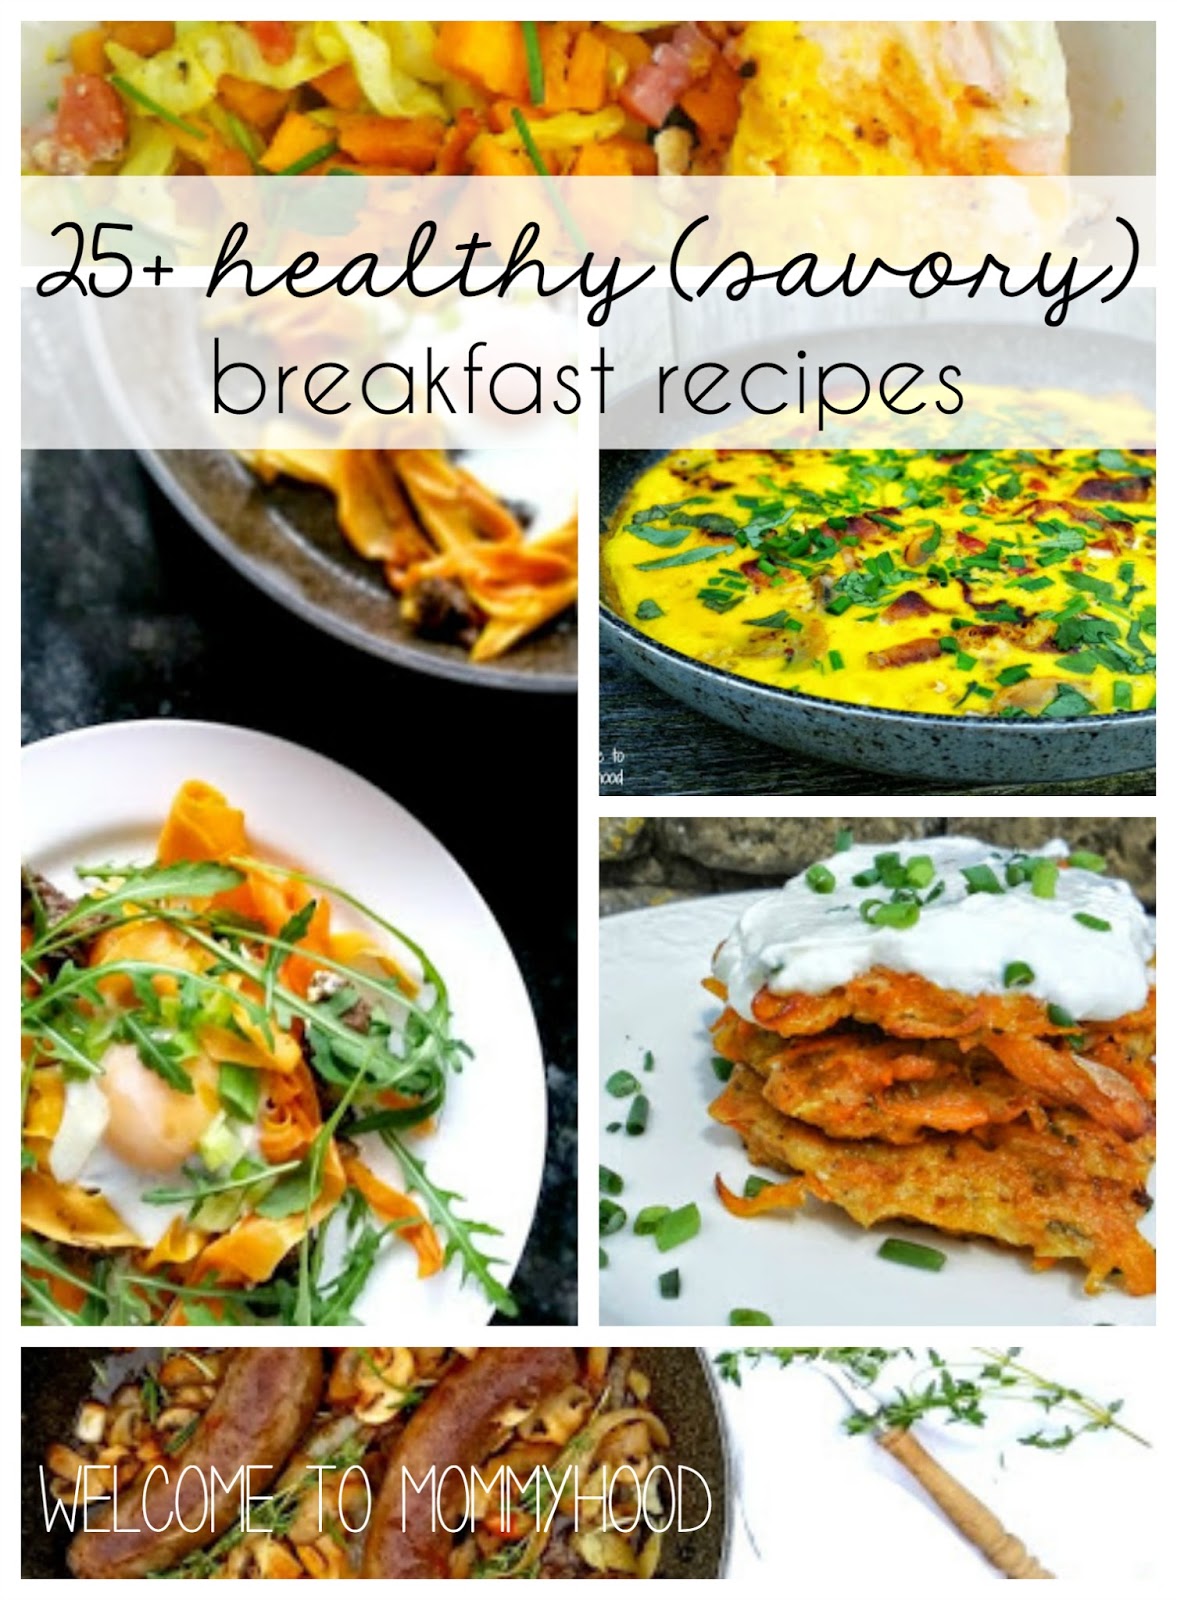 Welcome to Mommyhood: 25+ healthy savory breakfast recipes